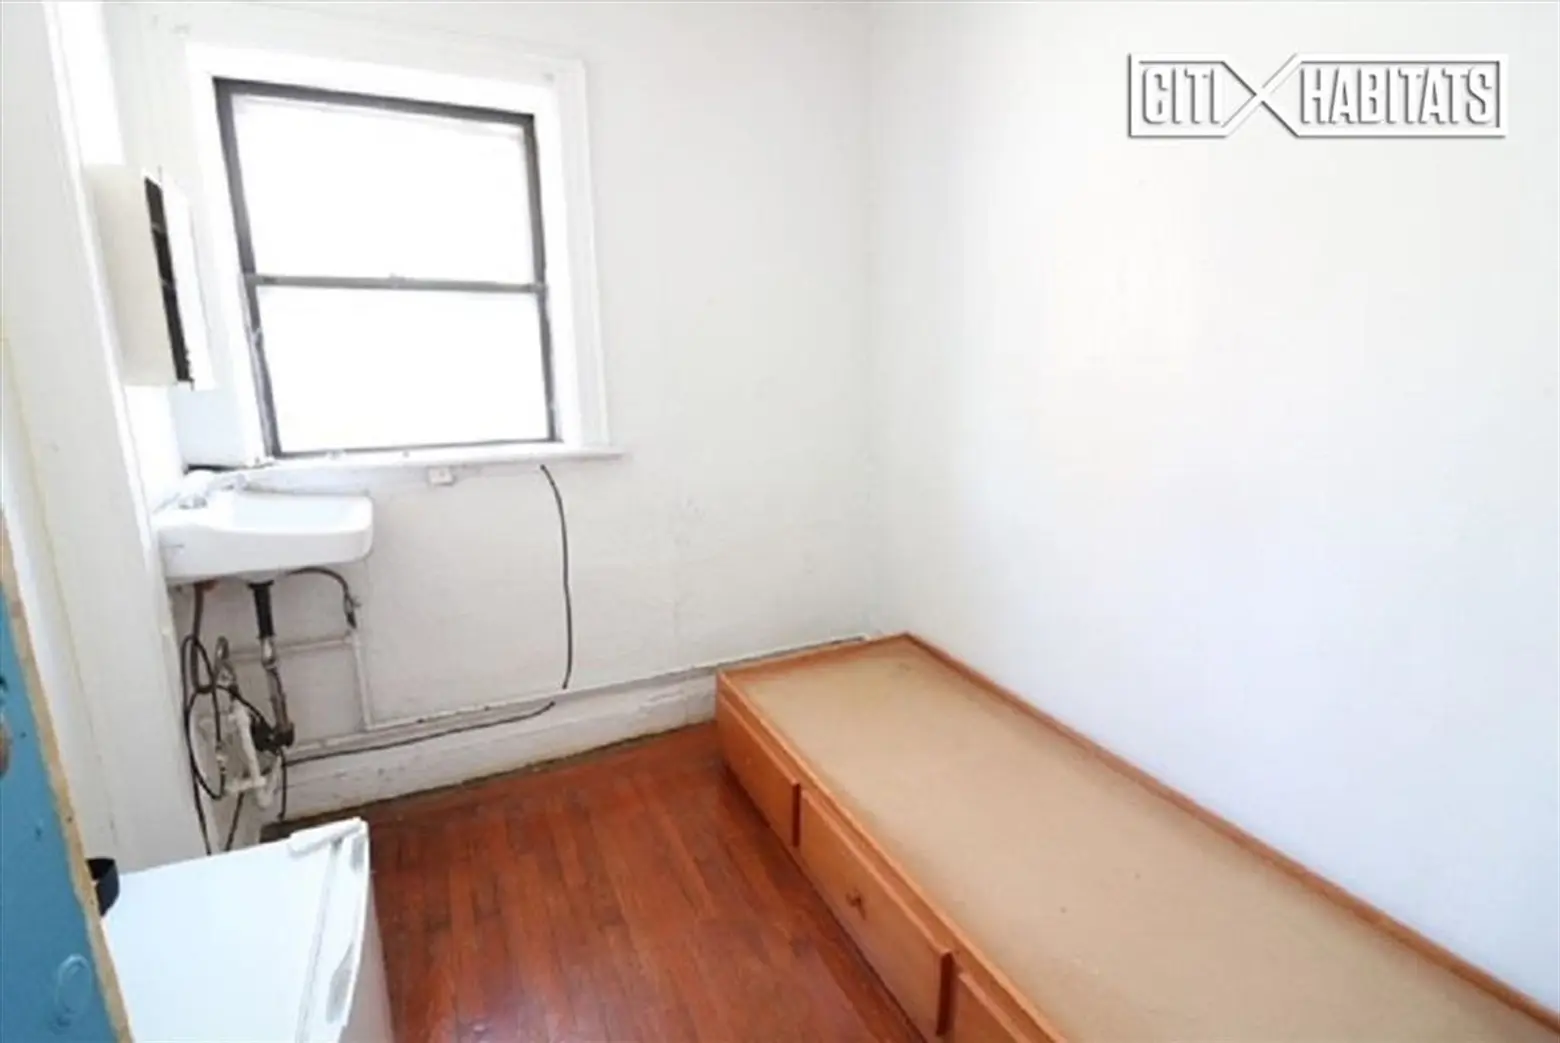 49-square-foot Upper West Side ‘studio’ might actually be a prison cell for $510/month